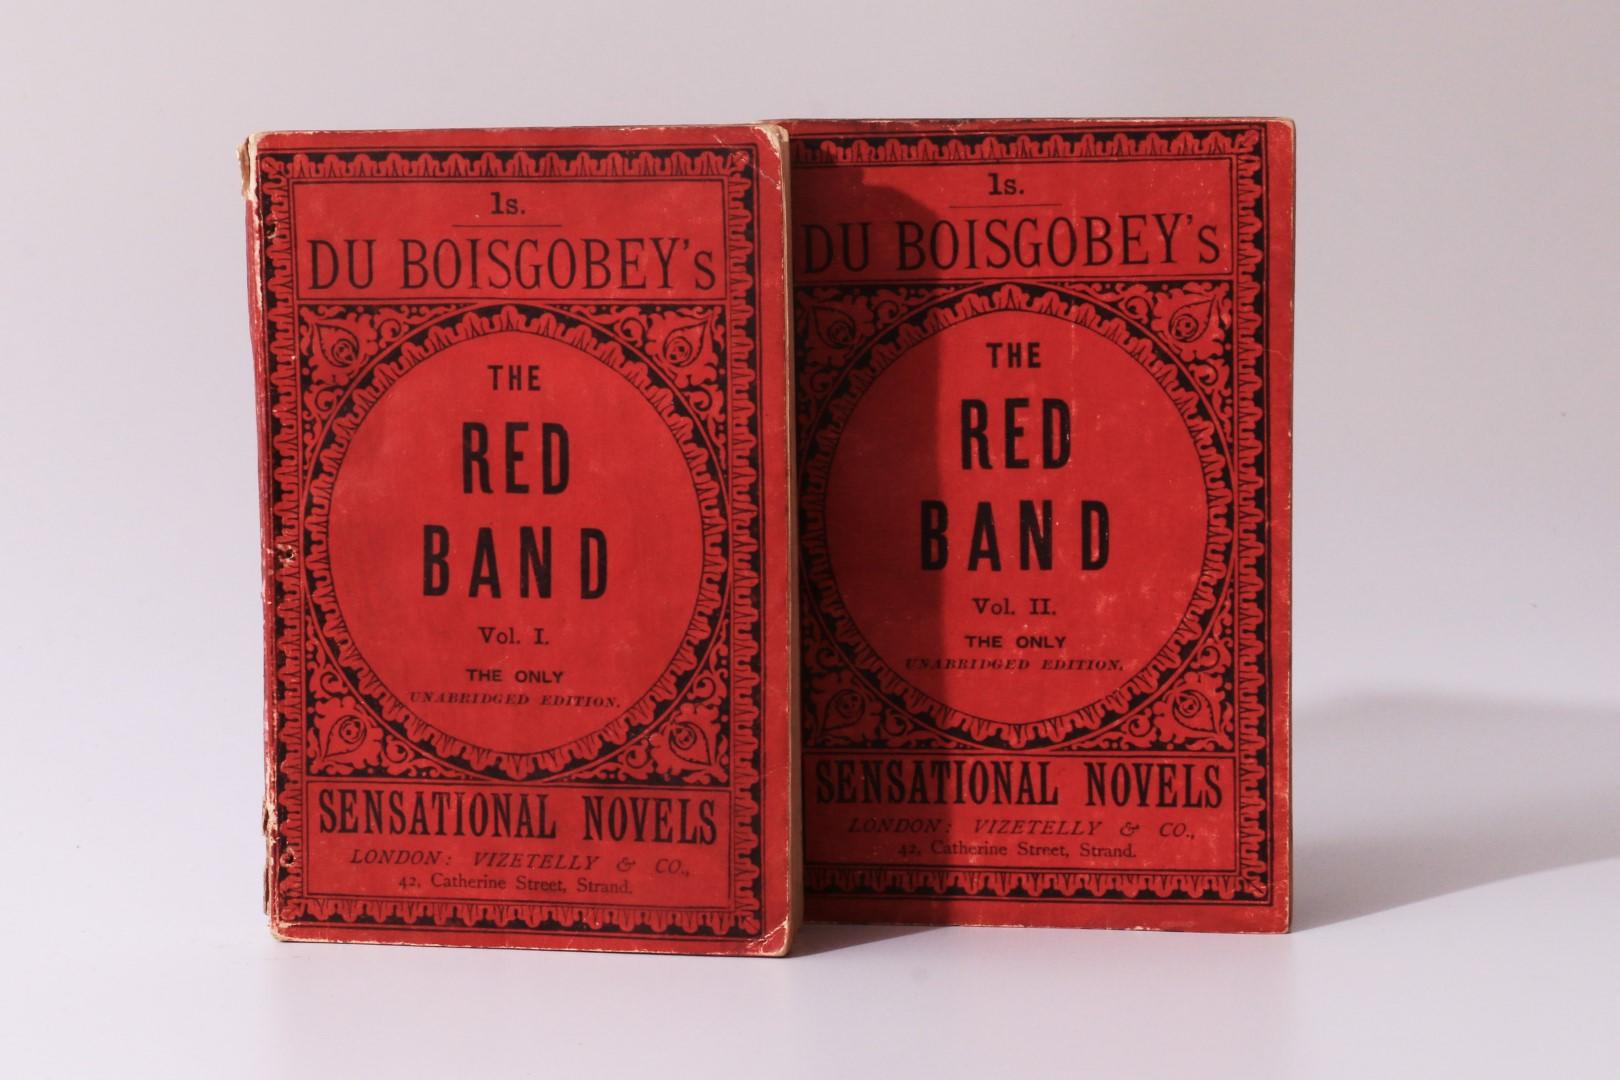 Fortune de Boisgobey - The Red Band - Vizetelly, 1887, First Edition.